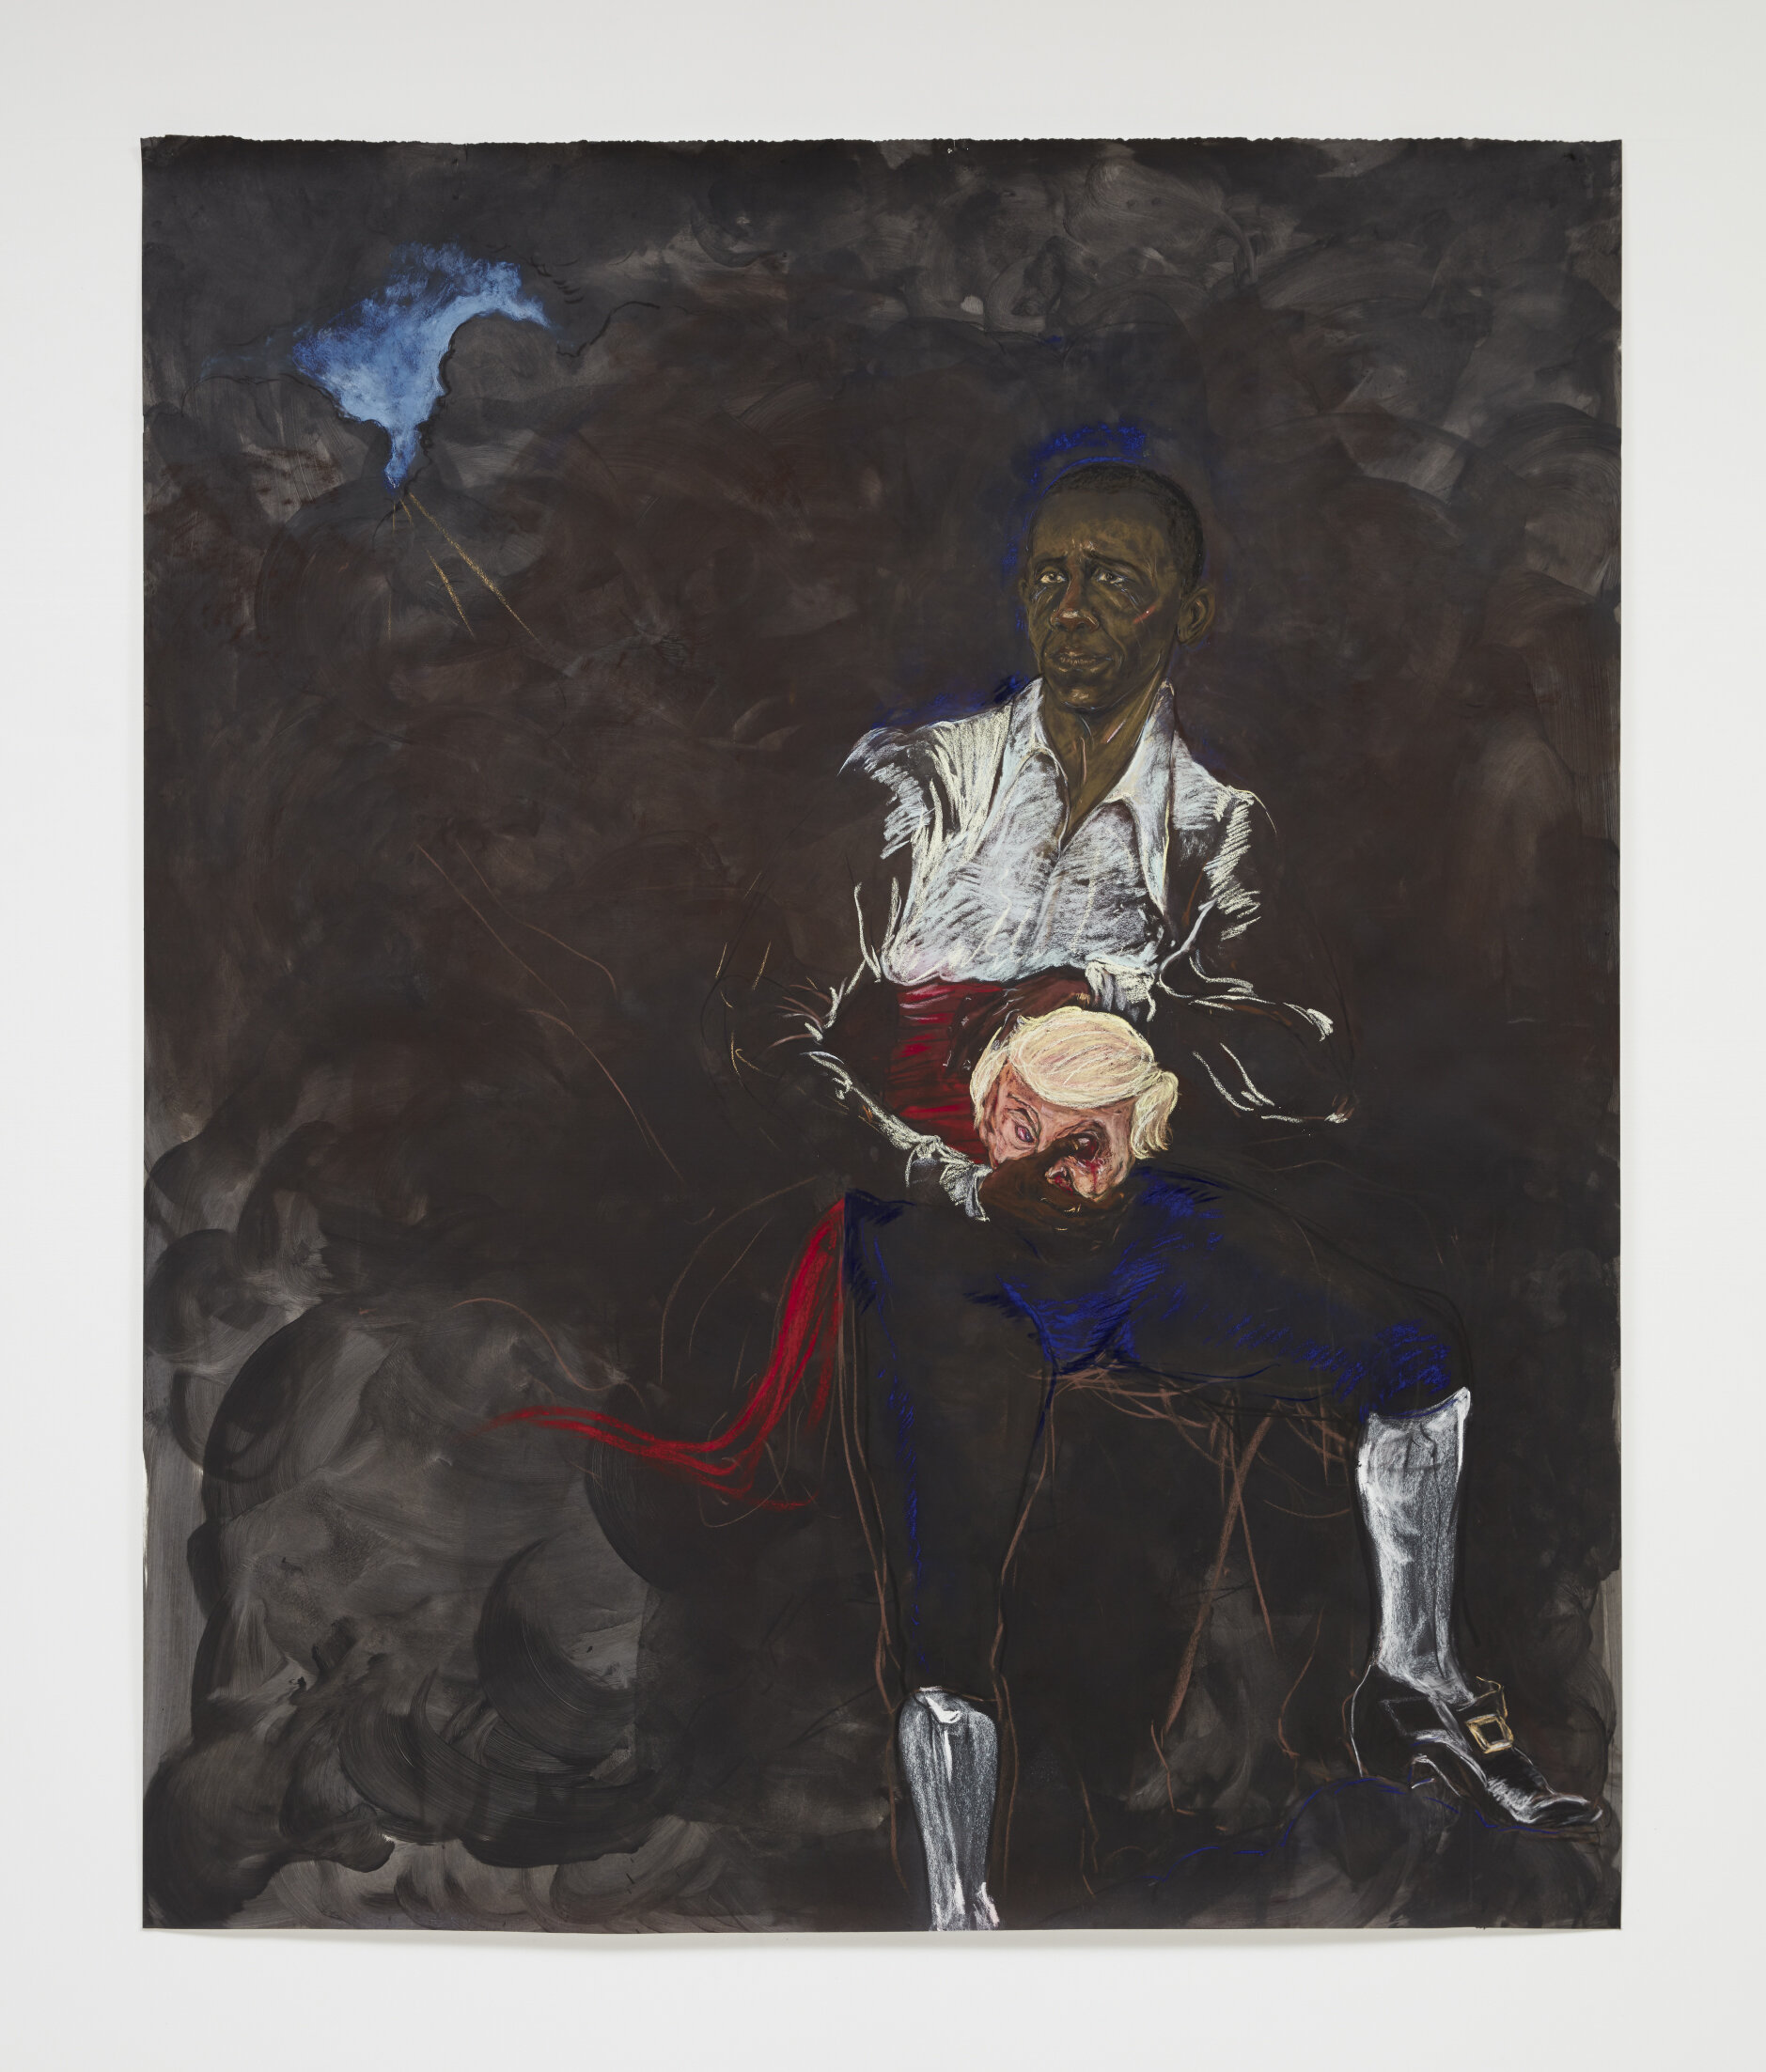   Barack Obama as Othello "The Moor" With the Severed Head of Iago in a New and Revised Ending by Kara E. Walker,  2019. Pastel, Conté crayon, charcoal on treated paper. 87.375 x 72 inches. 